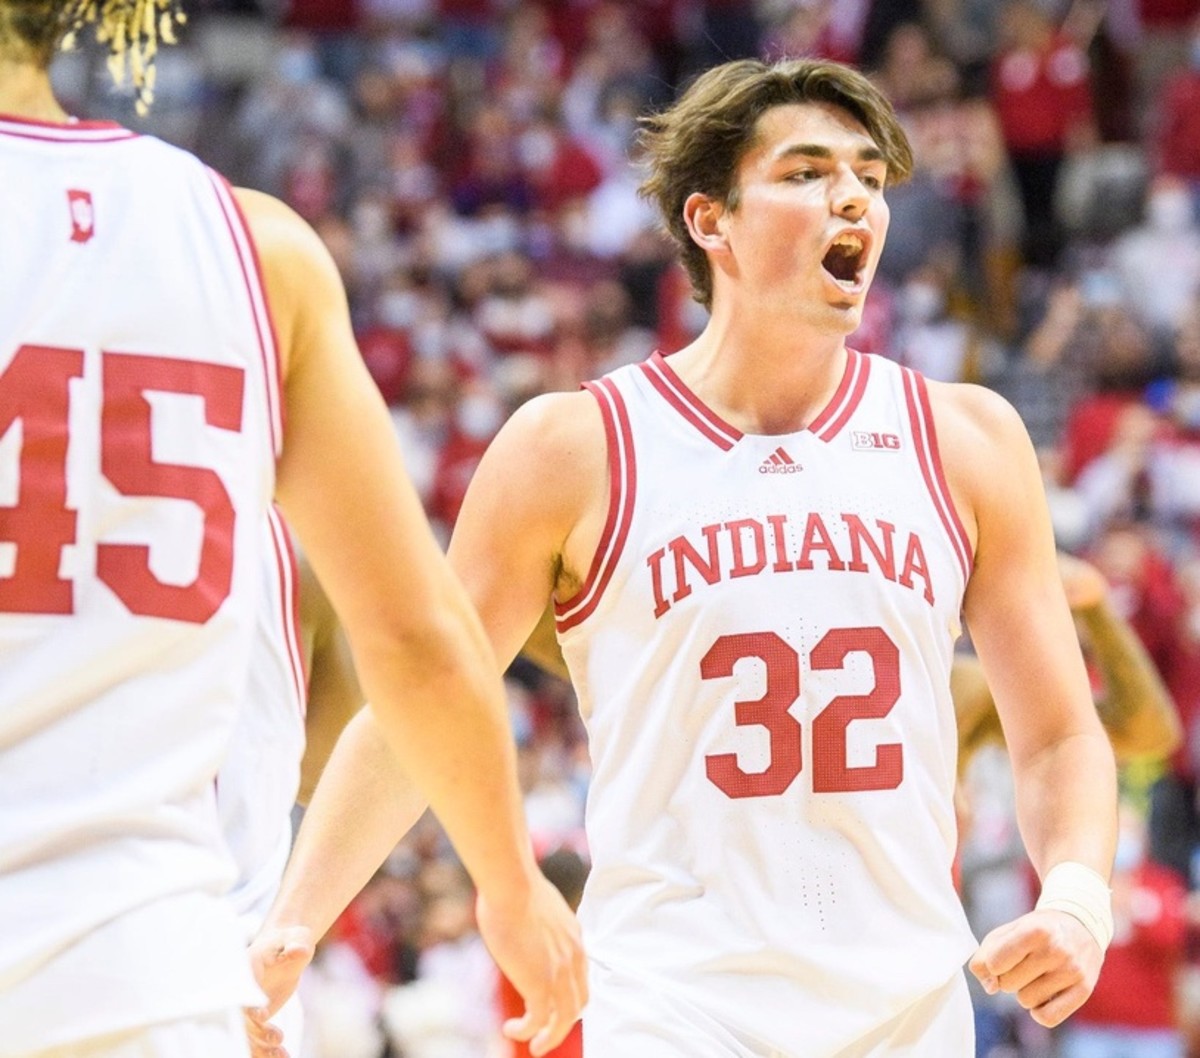 Indiana's Trey Galloway (32) celebrates during the second half of Indiana's win over Ohio State. (Rich Janzaruk/USA Today Sports)